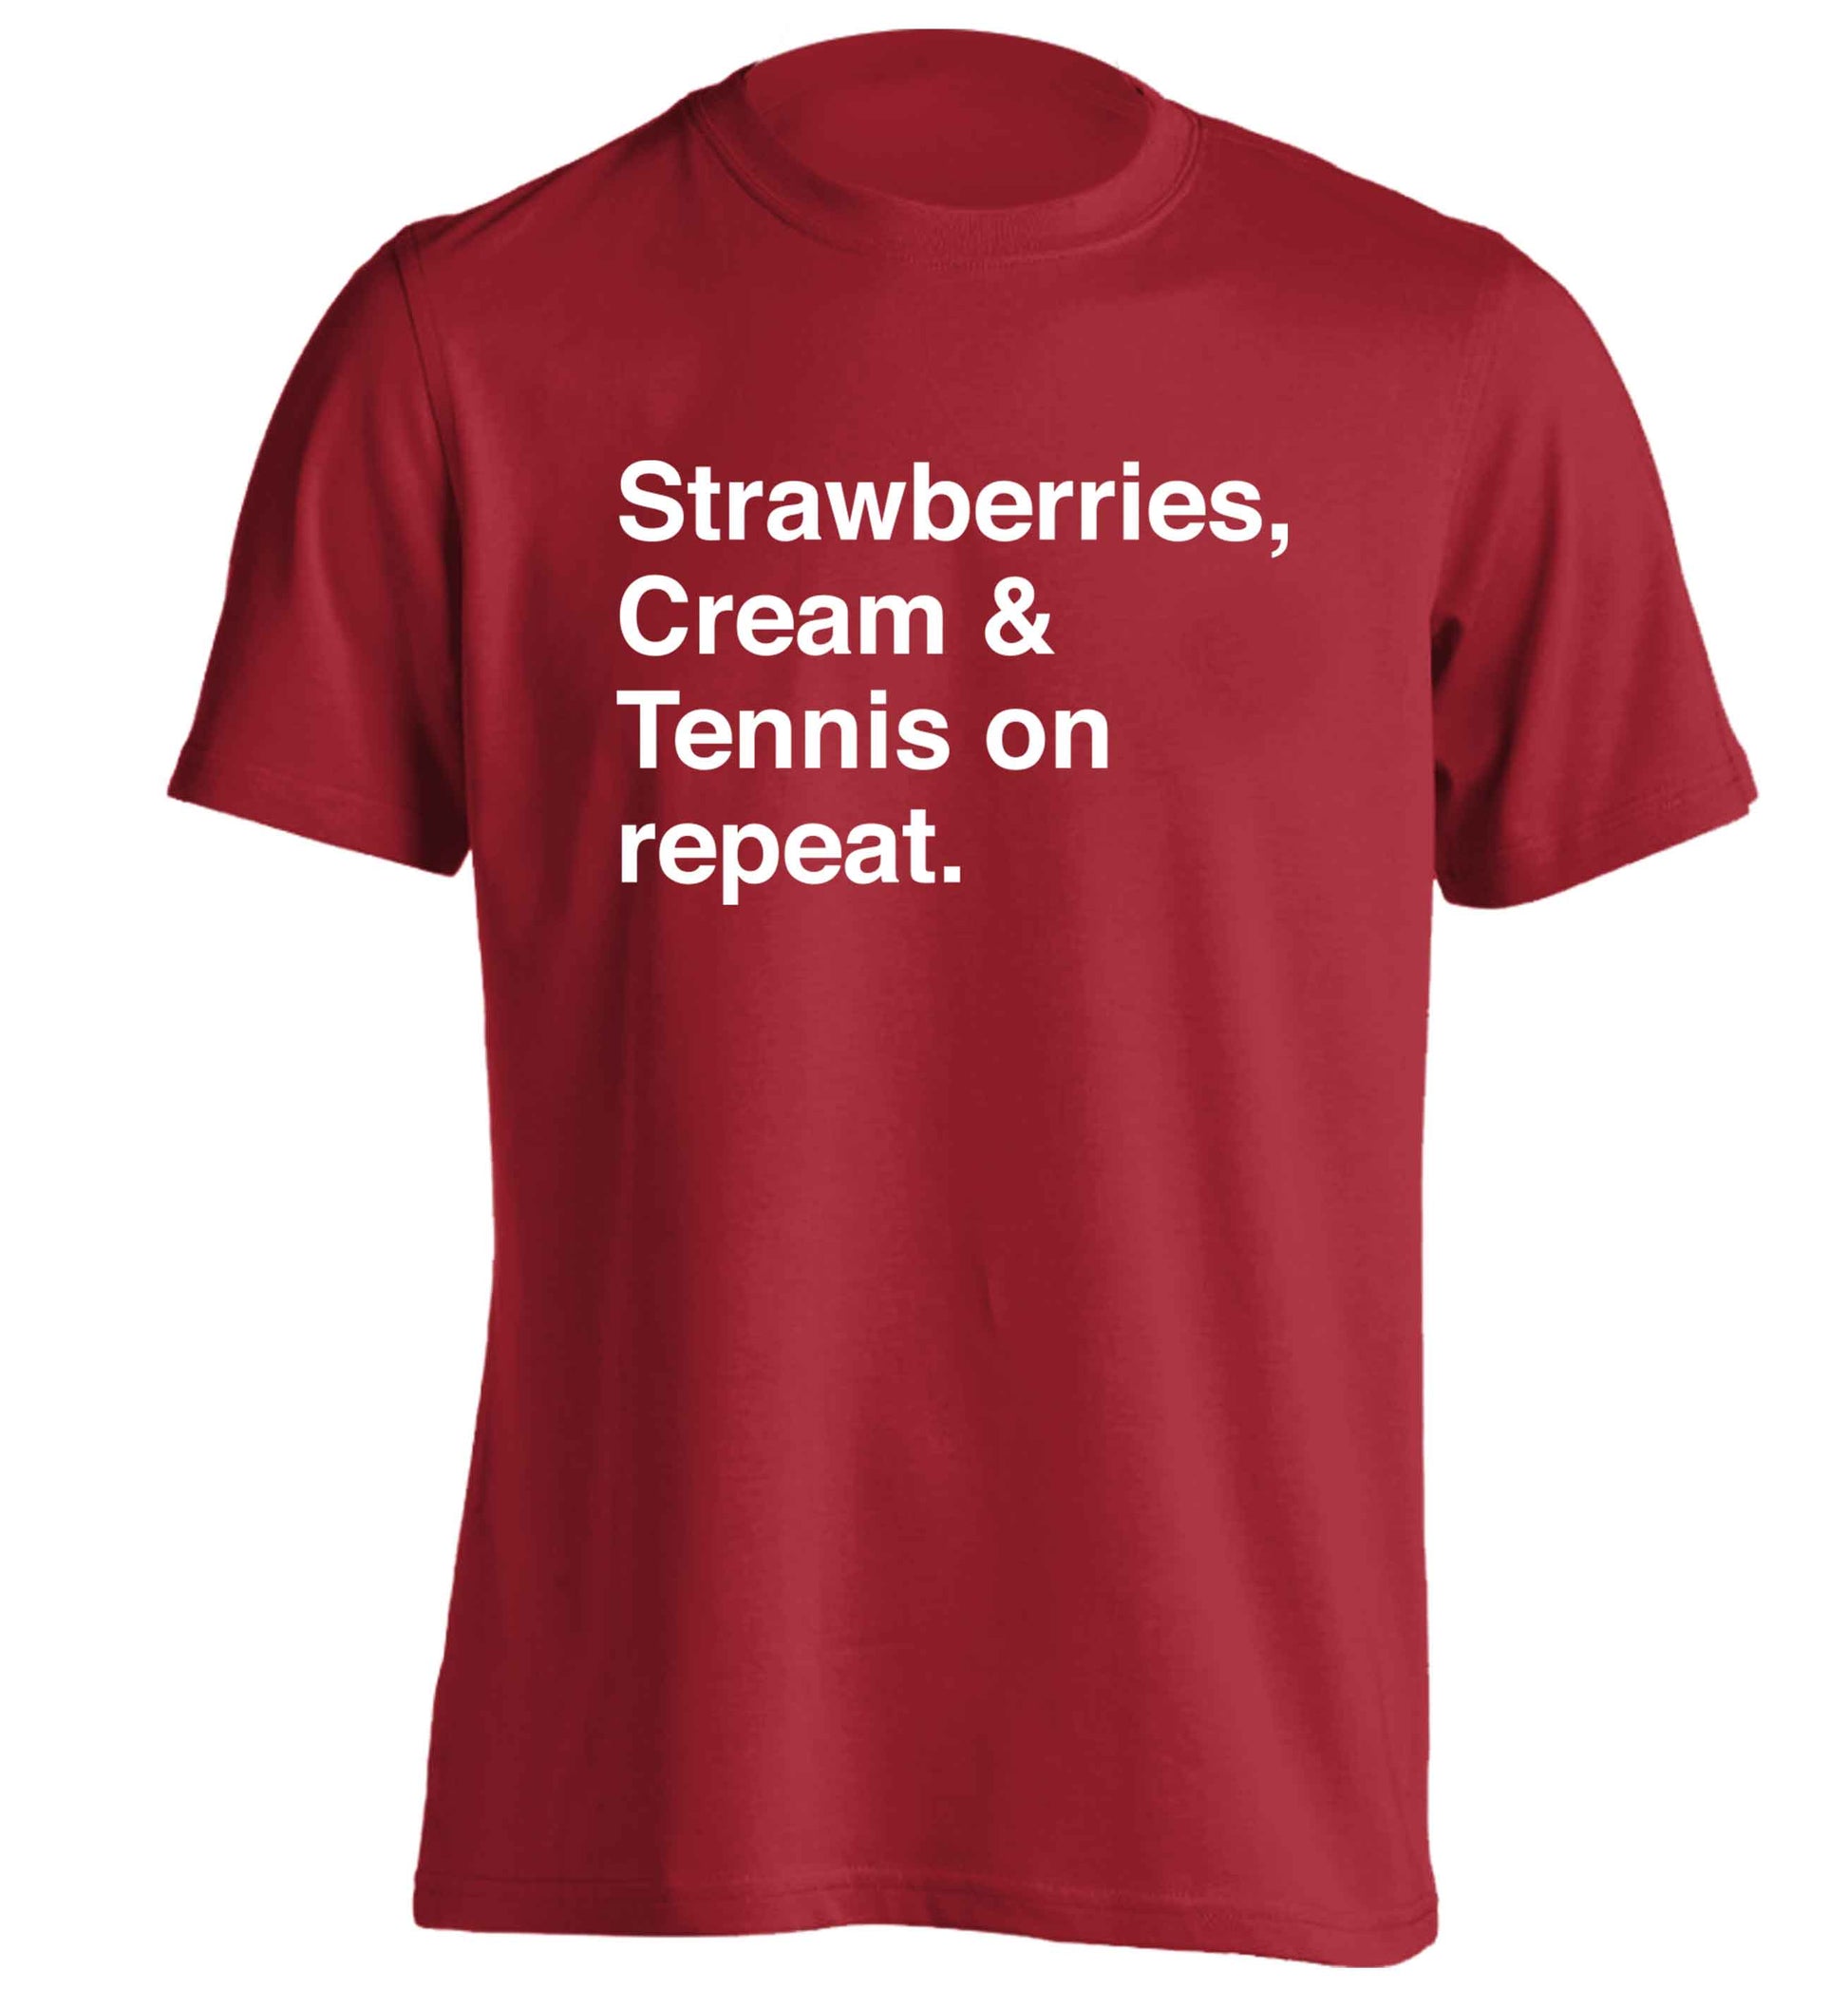 Strawberries, cream and tennis on repeat adults unisex red Tshirt 2XL